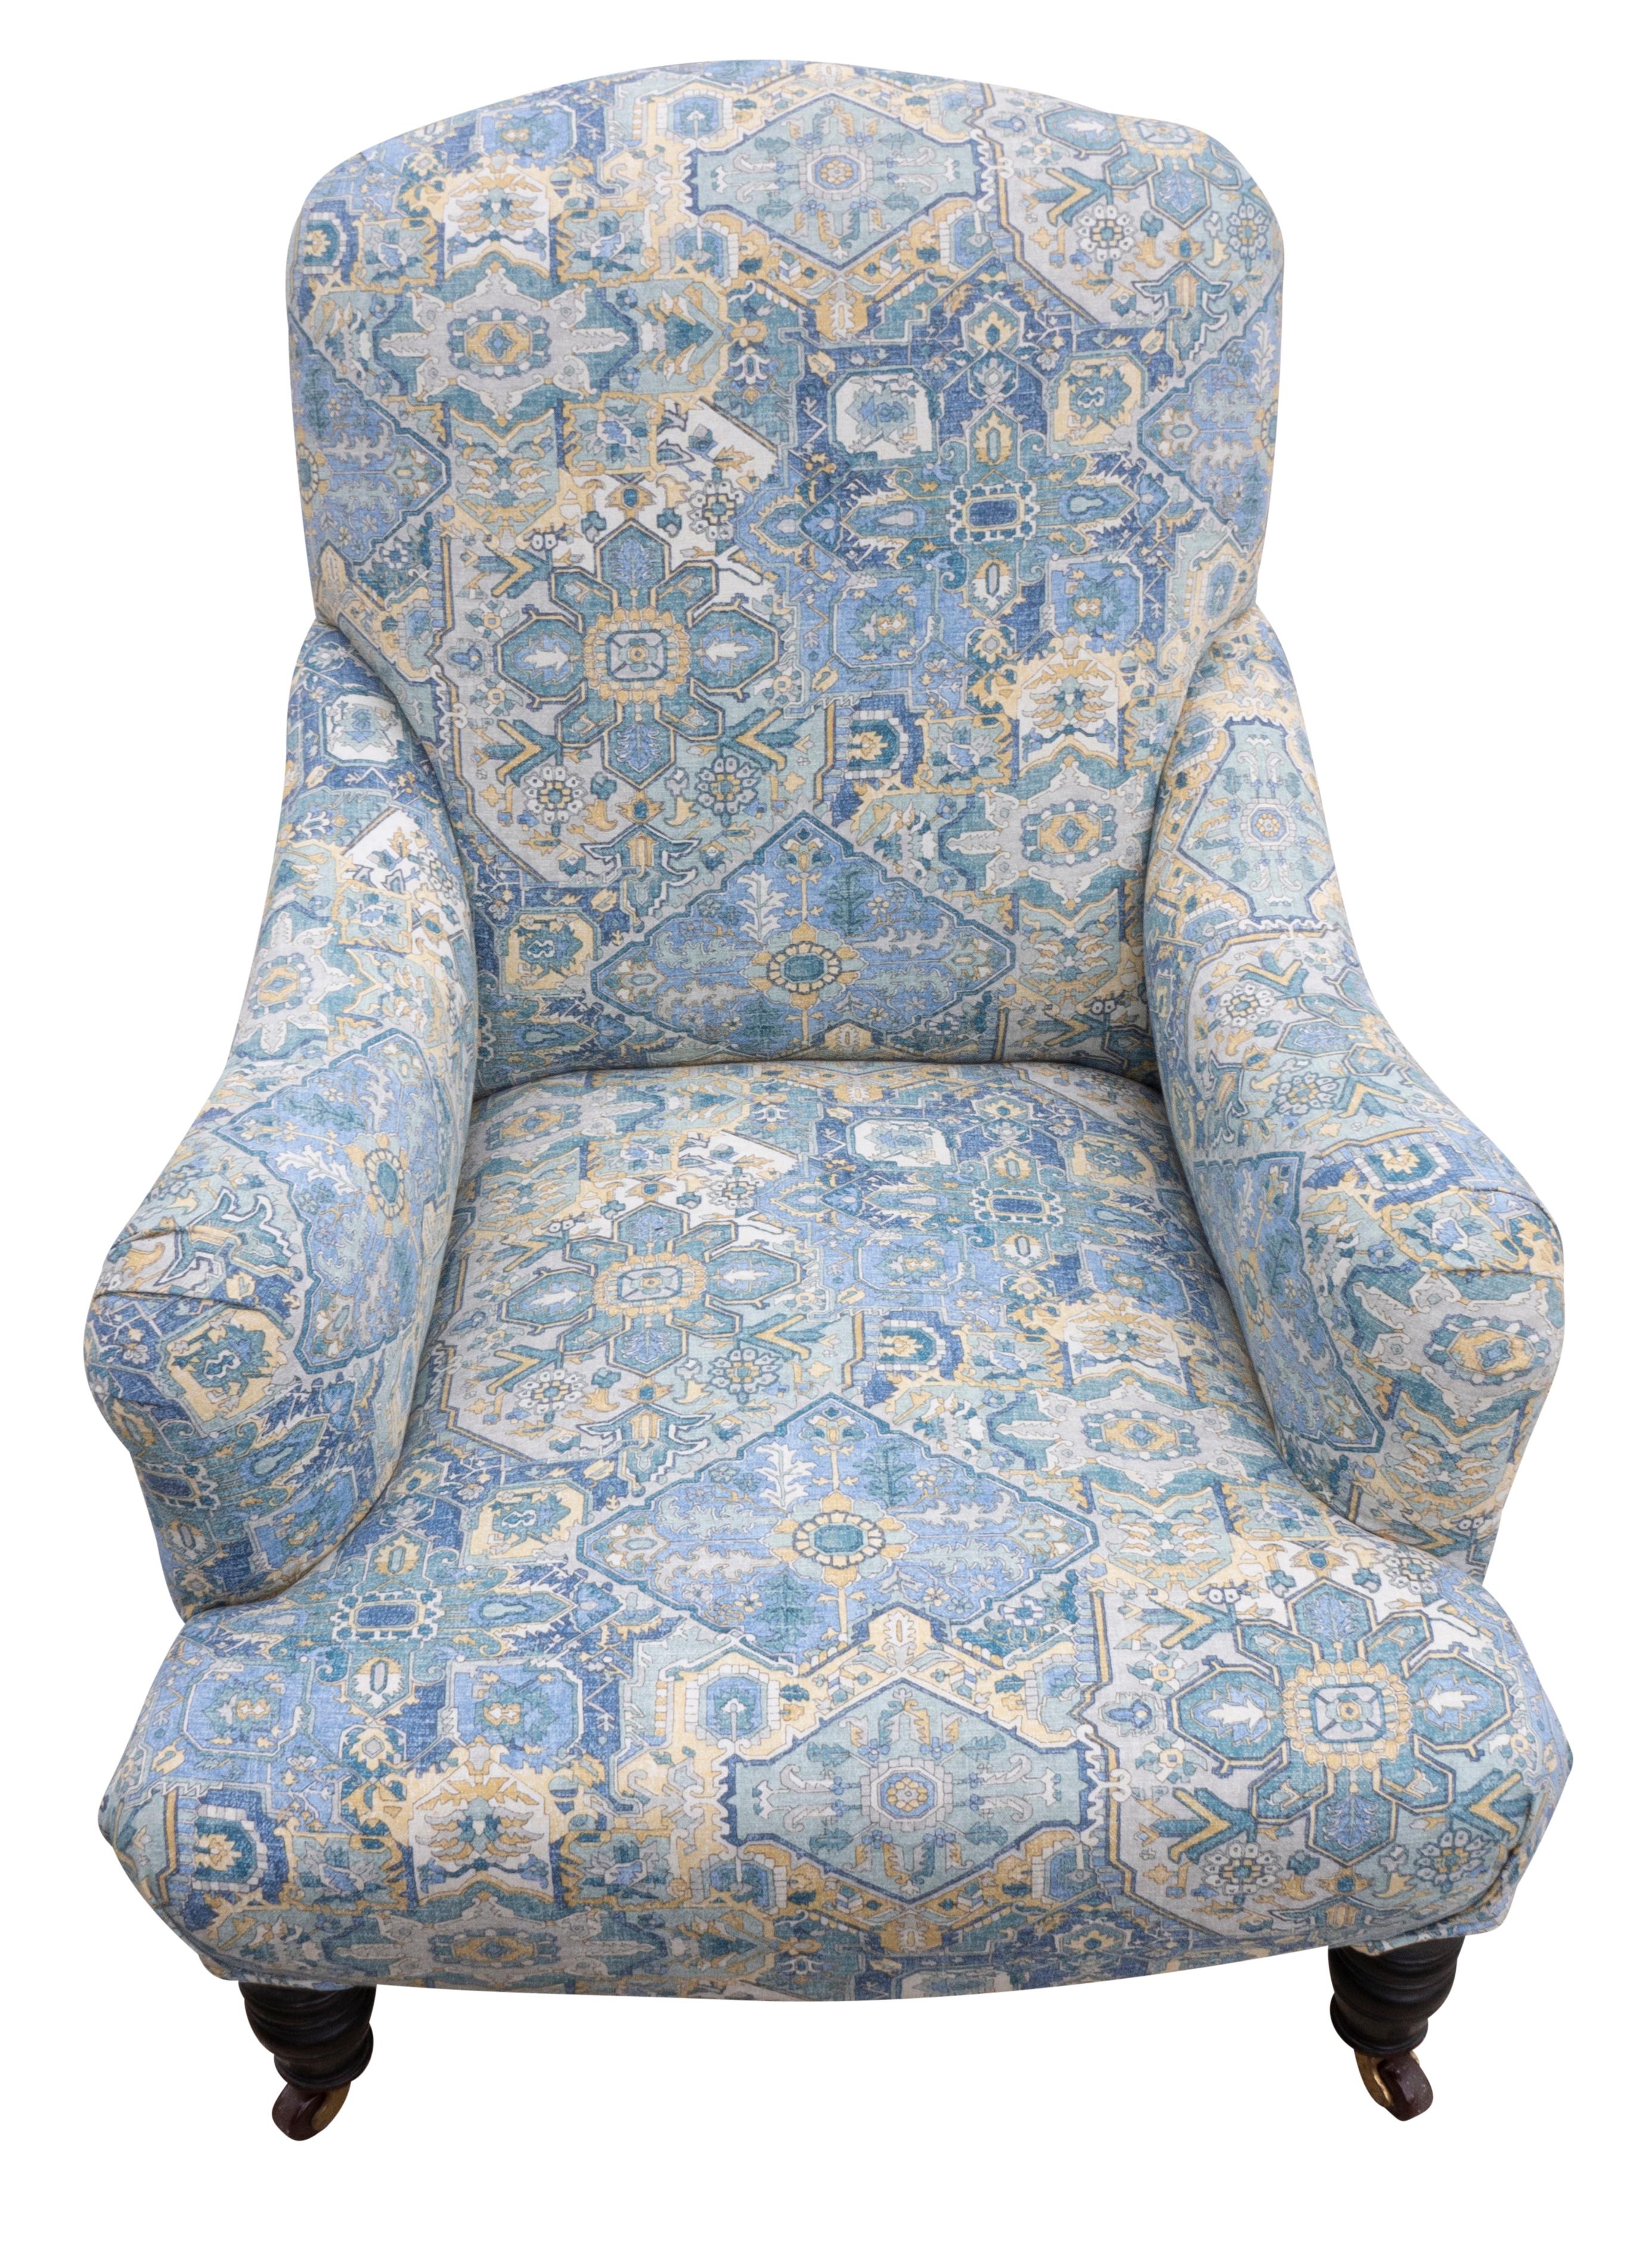 Mahogany Bridgewater Style Upholstered Armchair For Sale